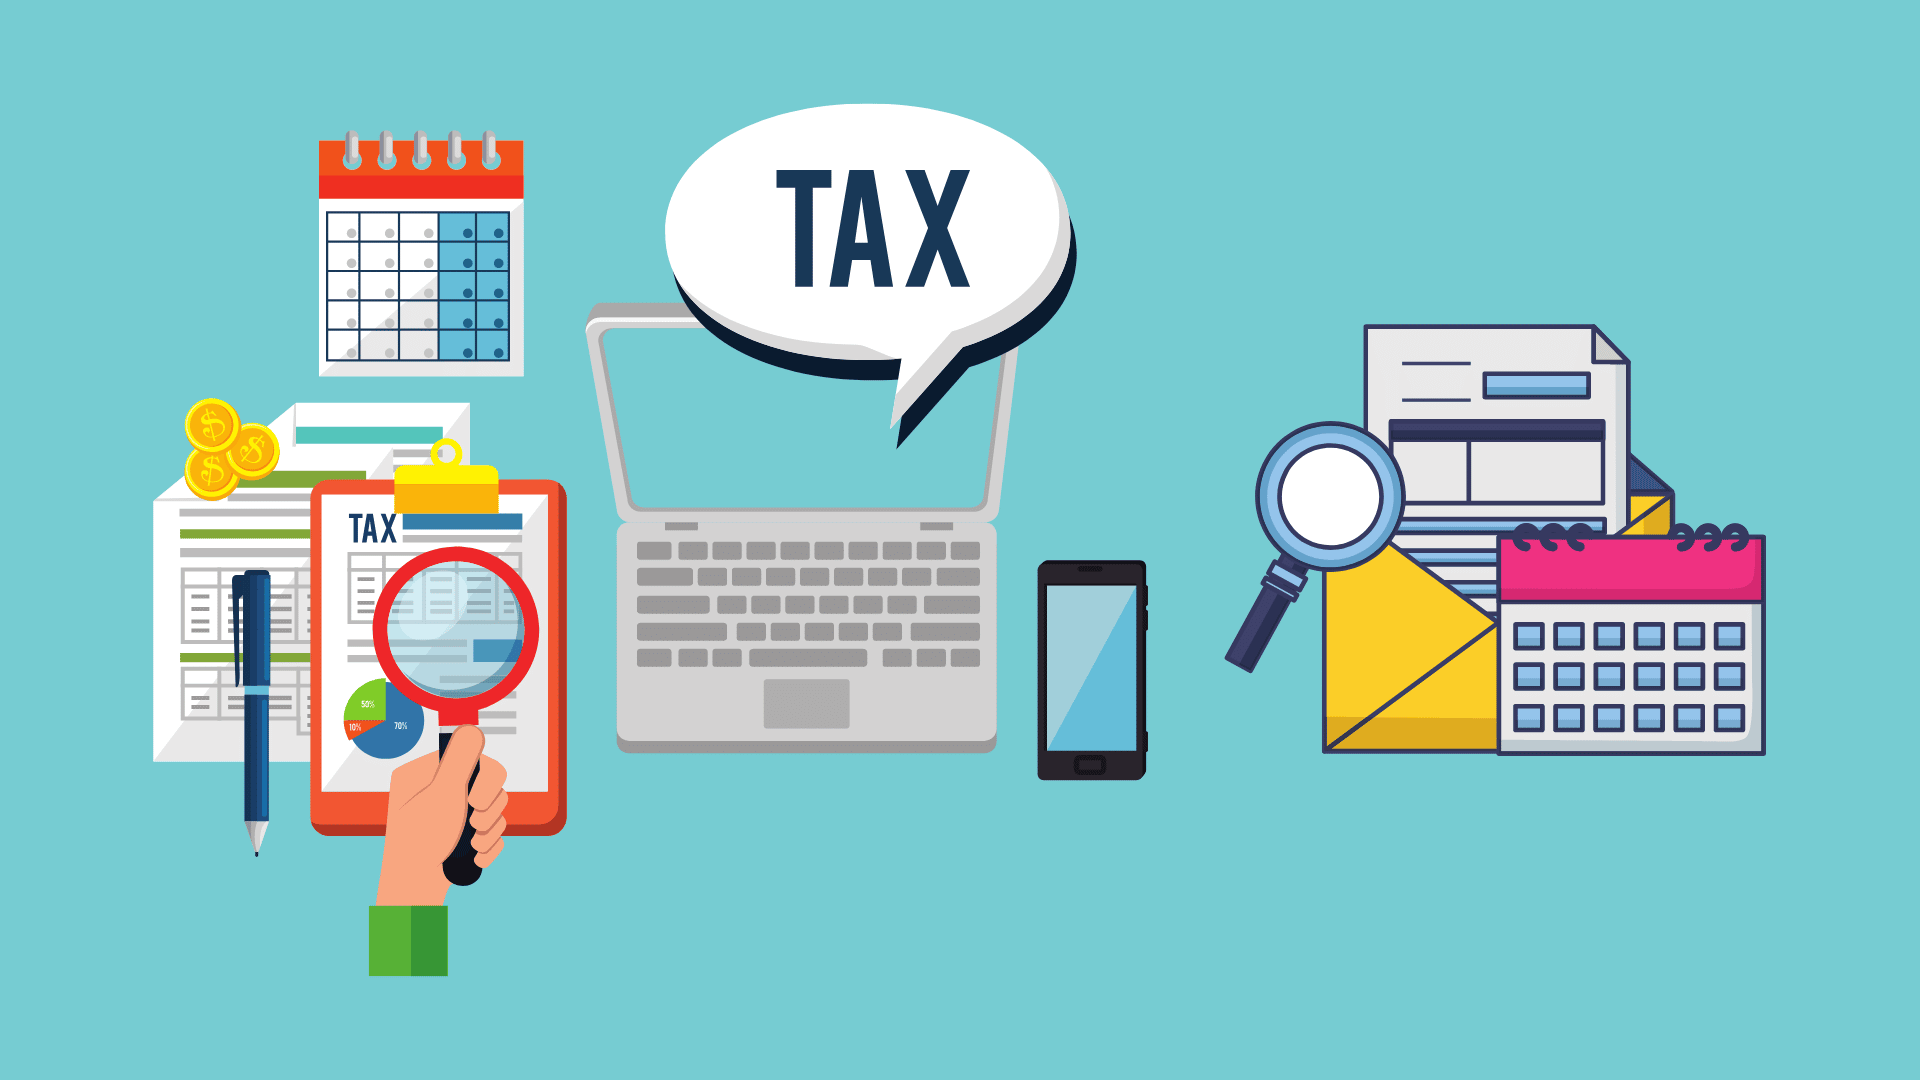 How does tax software work